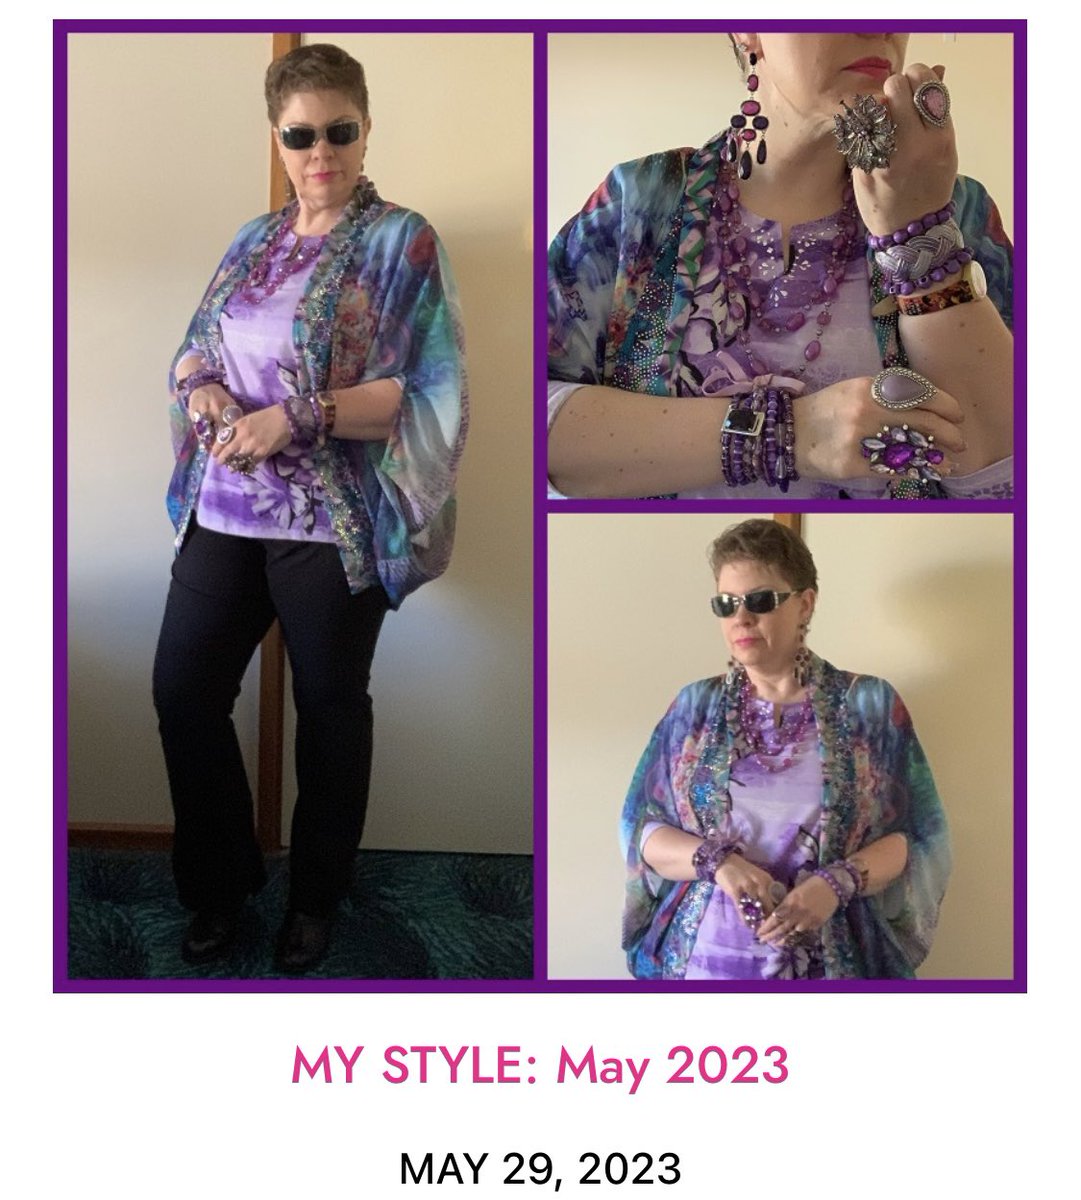 BLOG POST: May Style is up on the blog now with more outfits to show off. Link is in the bio.
.
#jeweldivasstyle #mystyle #autumnstyle #australianstyle #aussiestyle #over40style #over40fashion #fashion #style #whatiwear #whatiwore #outfits #lifestyleblogger #maystyle